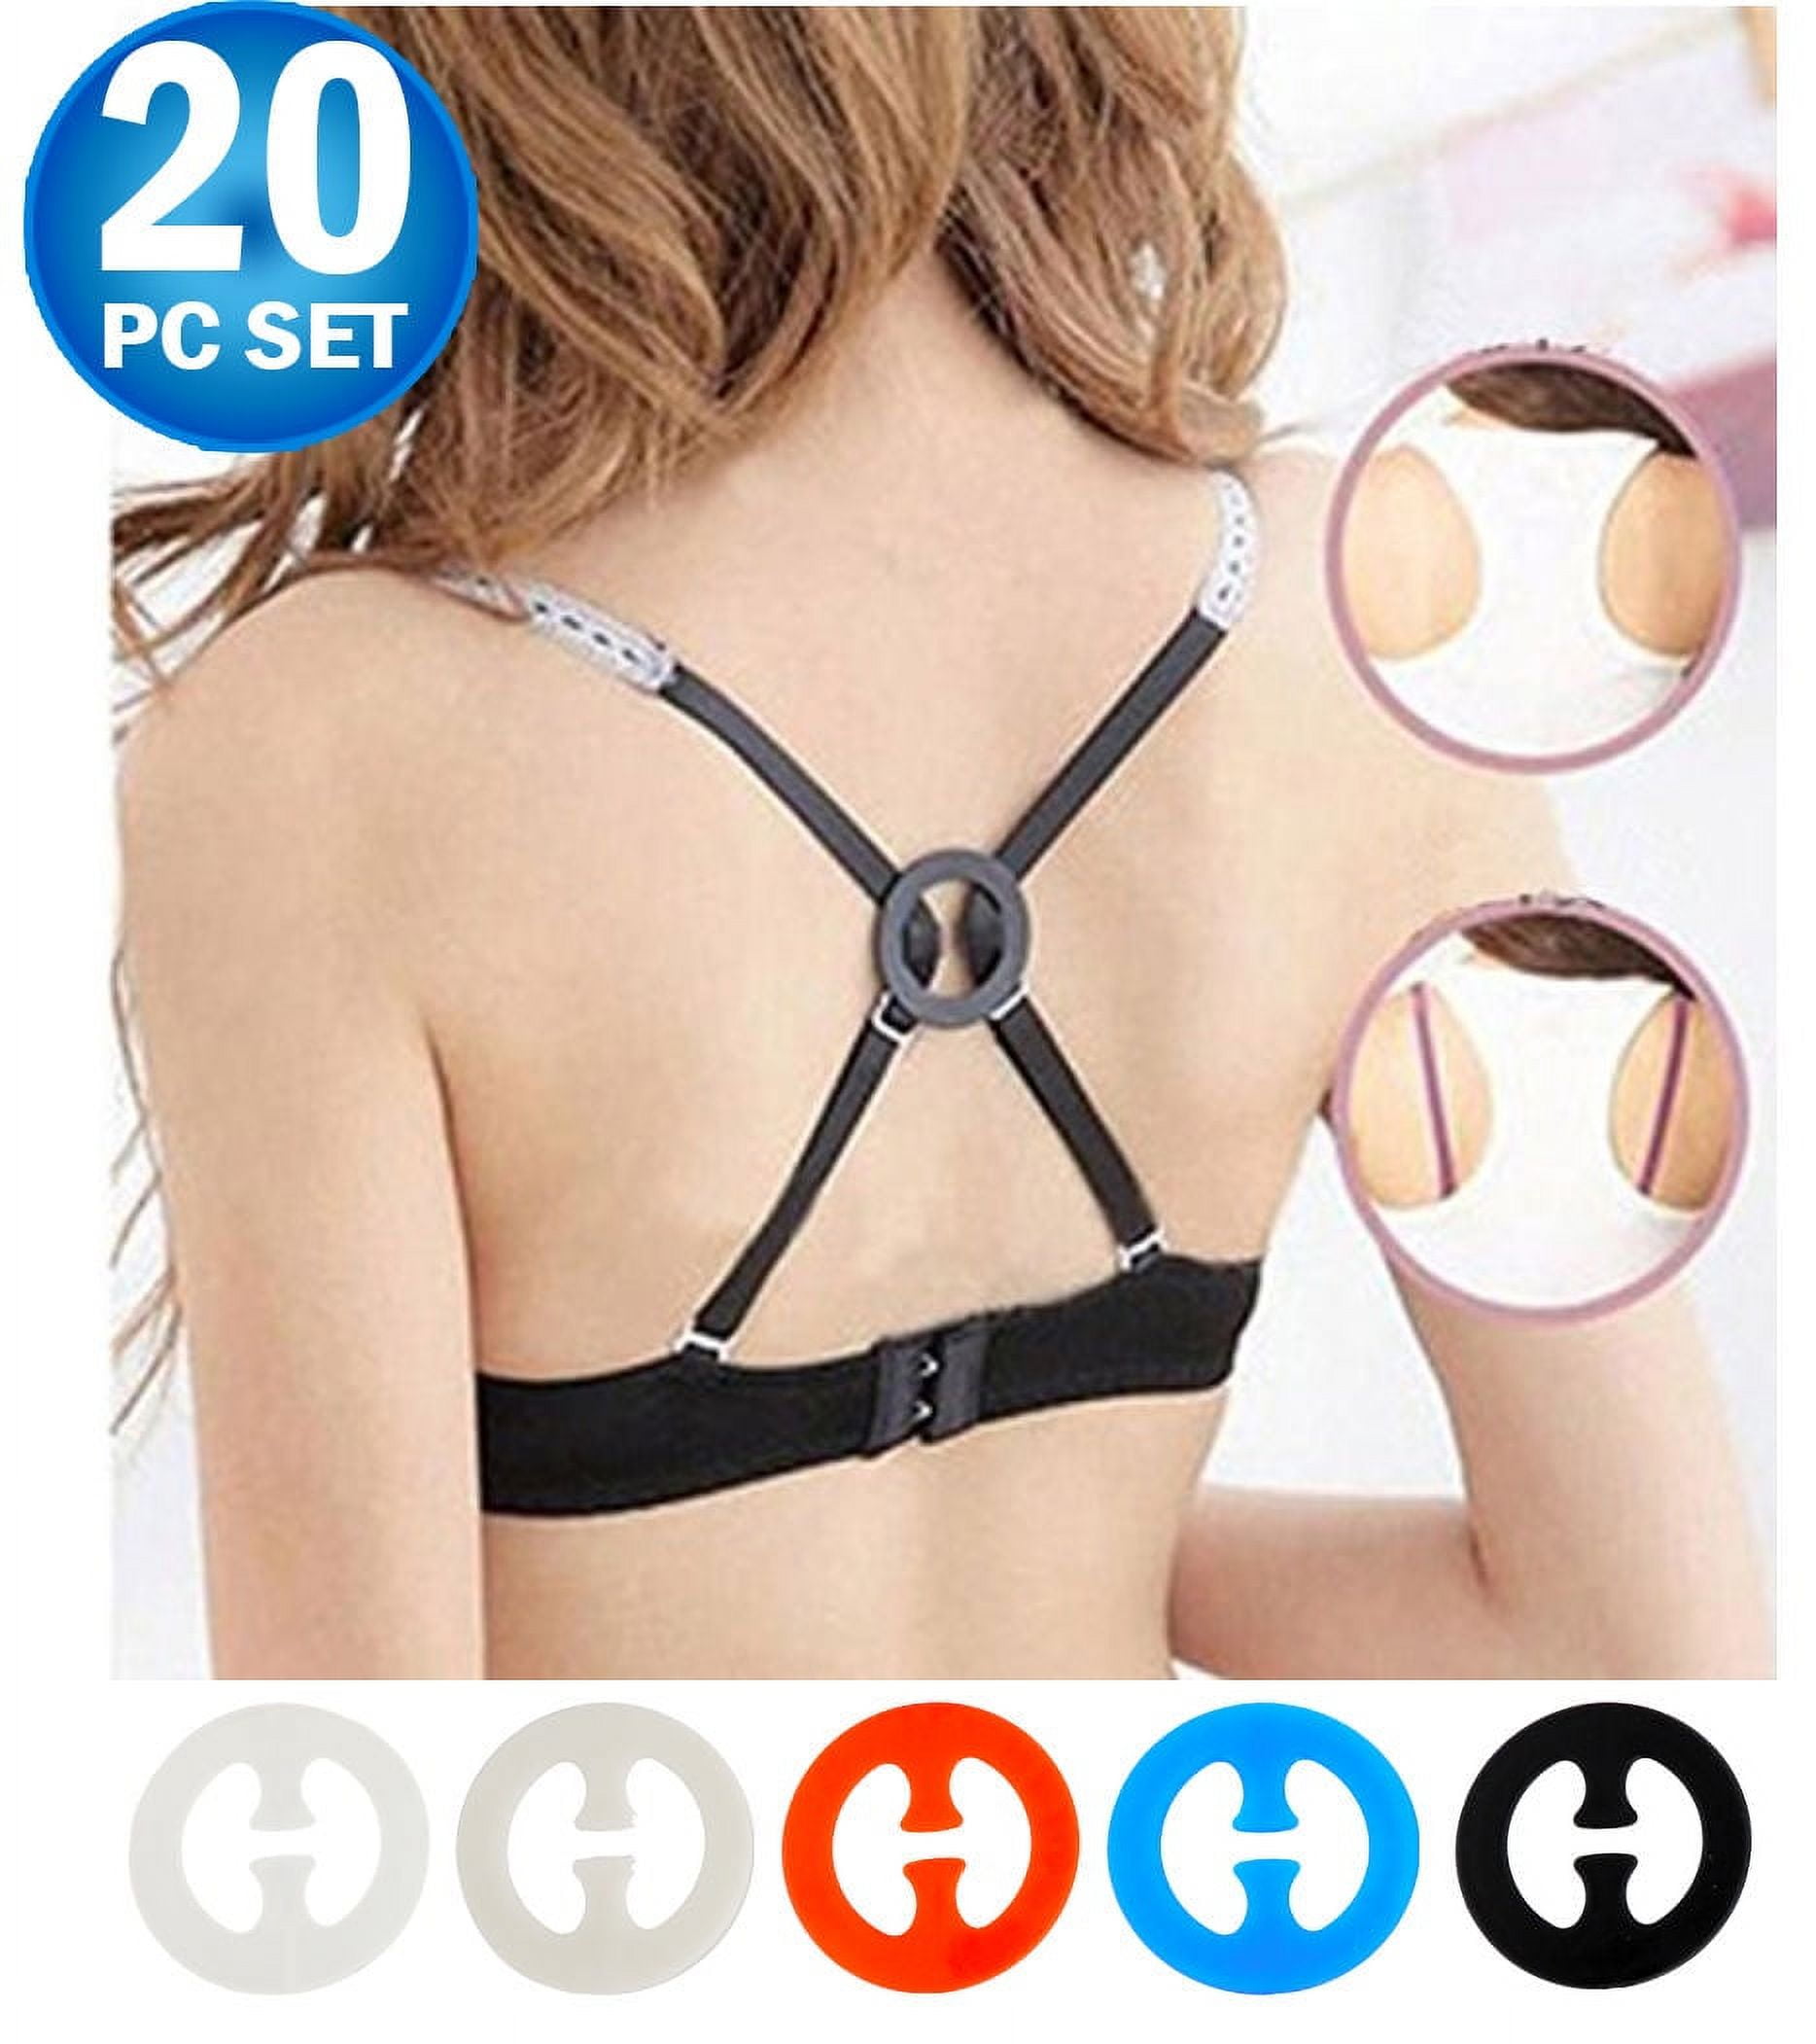 Bra Strap Clips For Back - Conceal Bra Straps, Bra Strap Holder, Cleavage  Control - Racerback Bra Clips Add Full Cup Size (20pc)